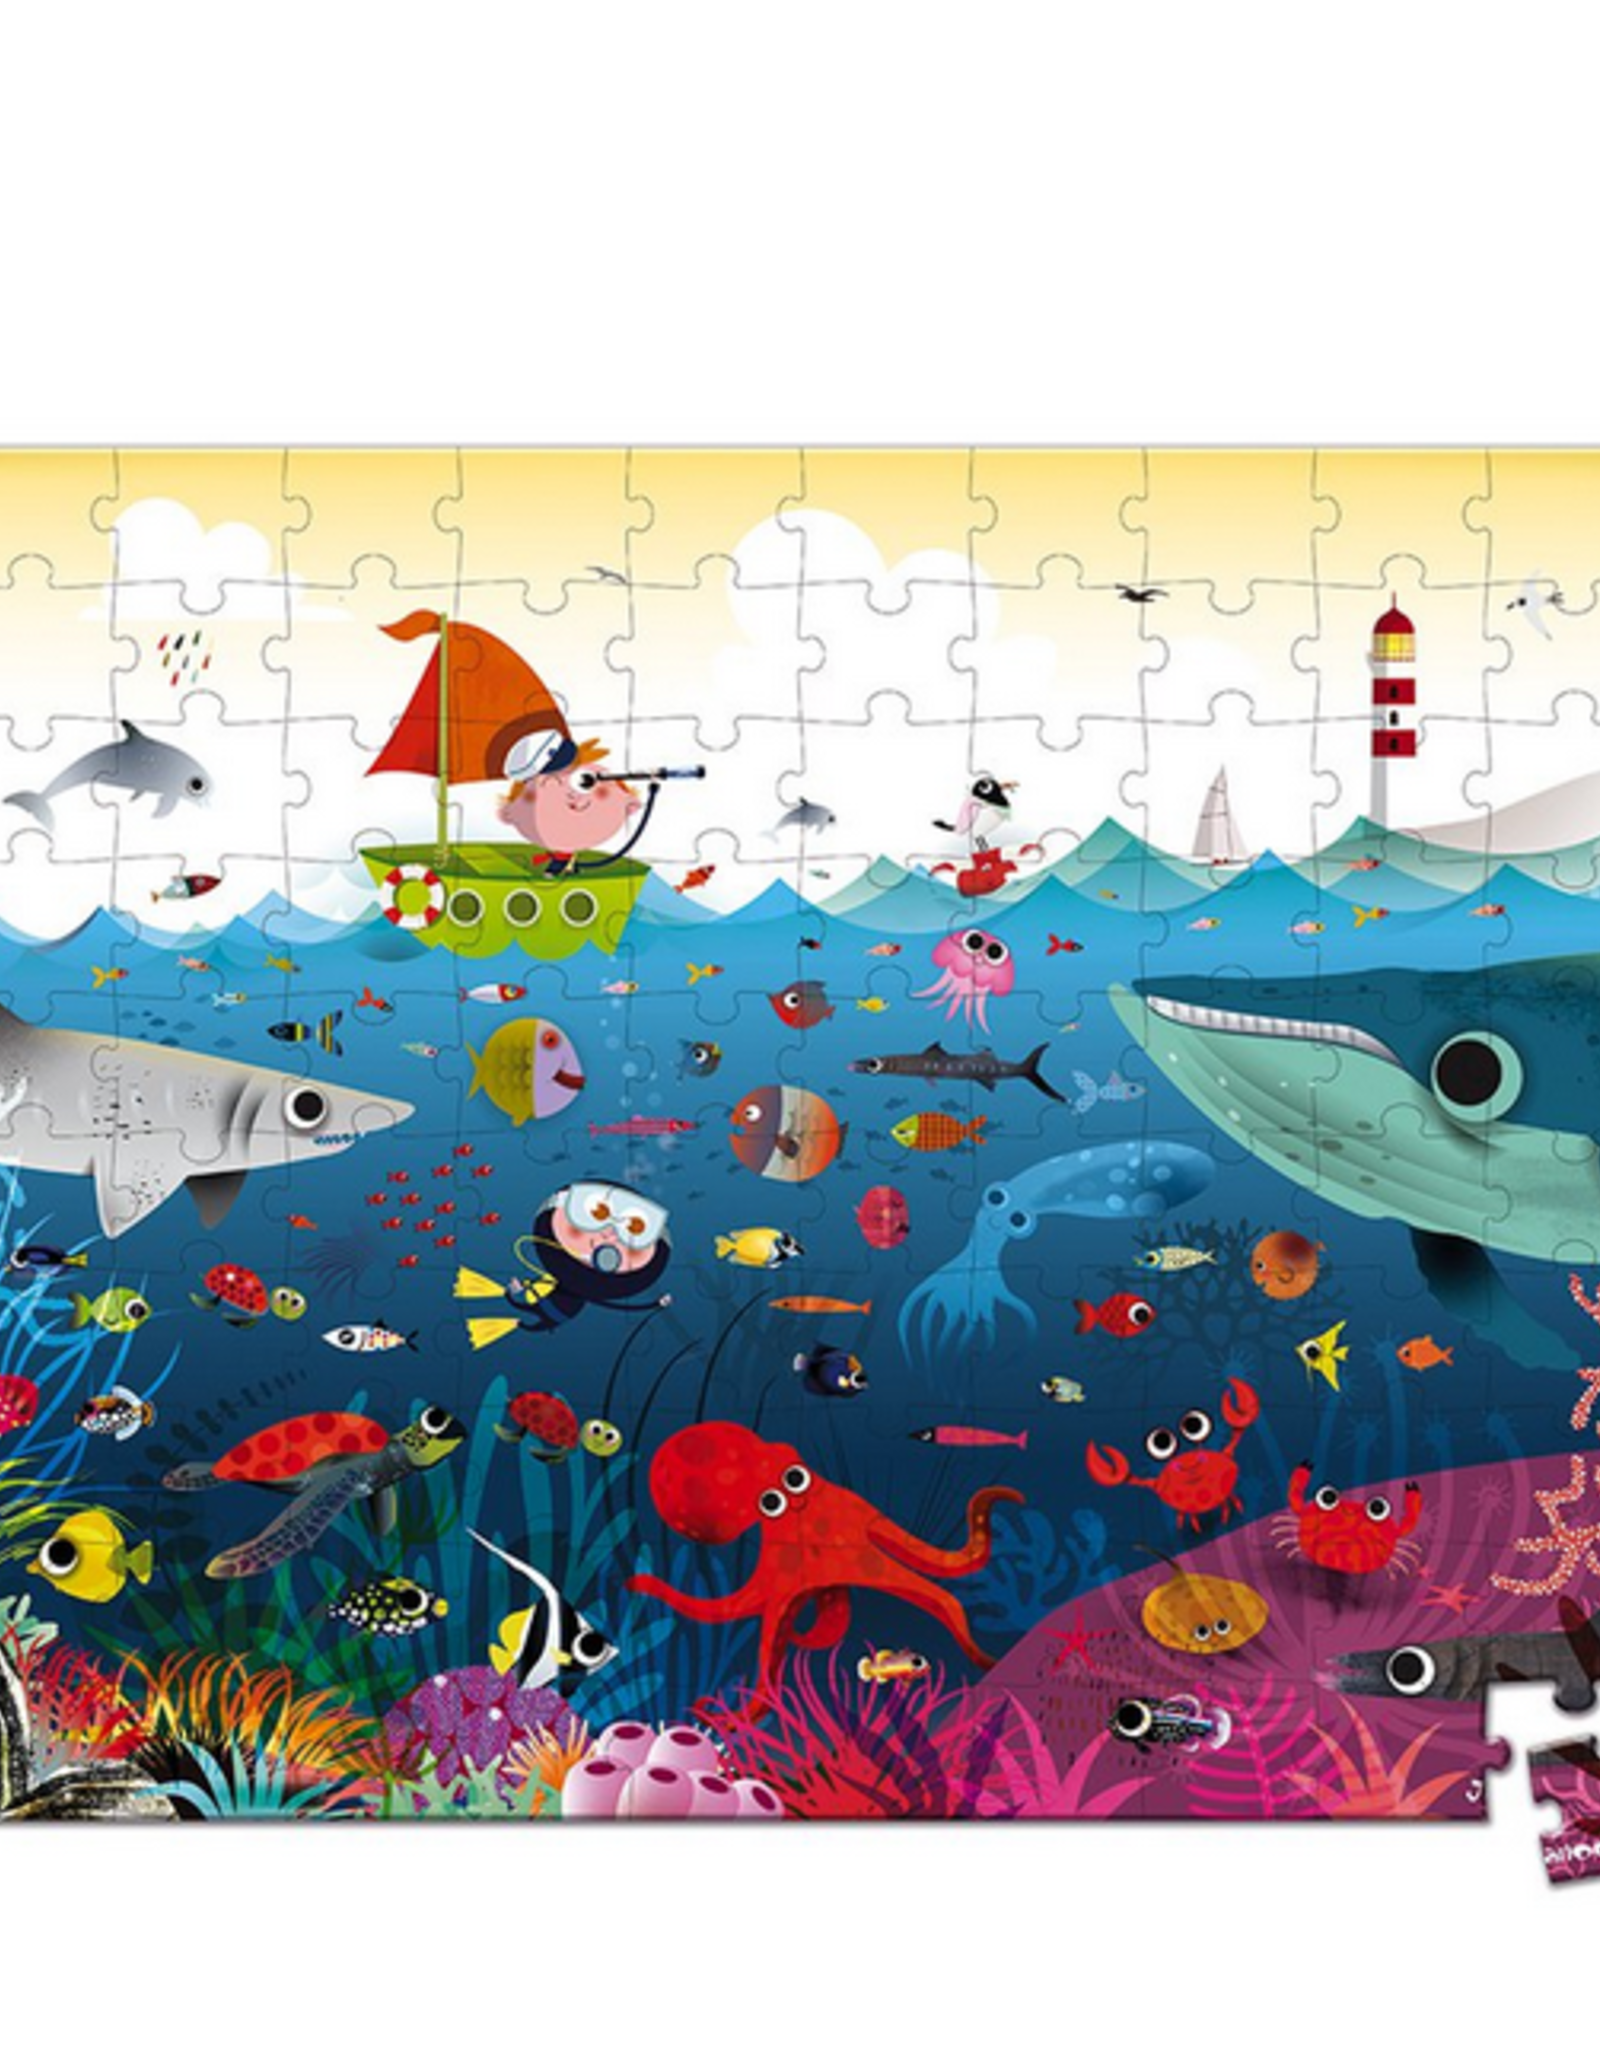 Janod Hat Boxed Puzzle 100pc: Underwater World